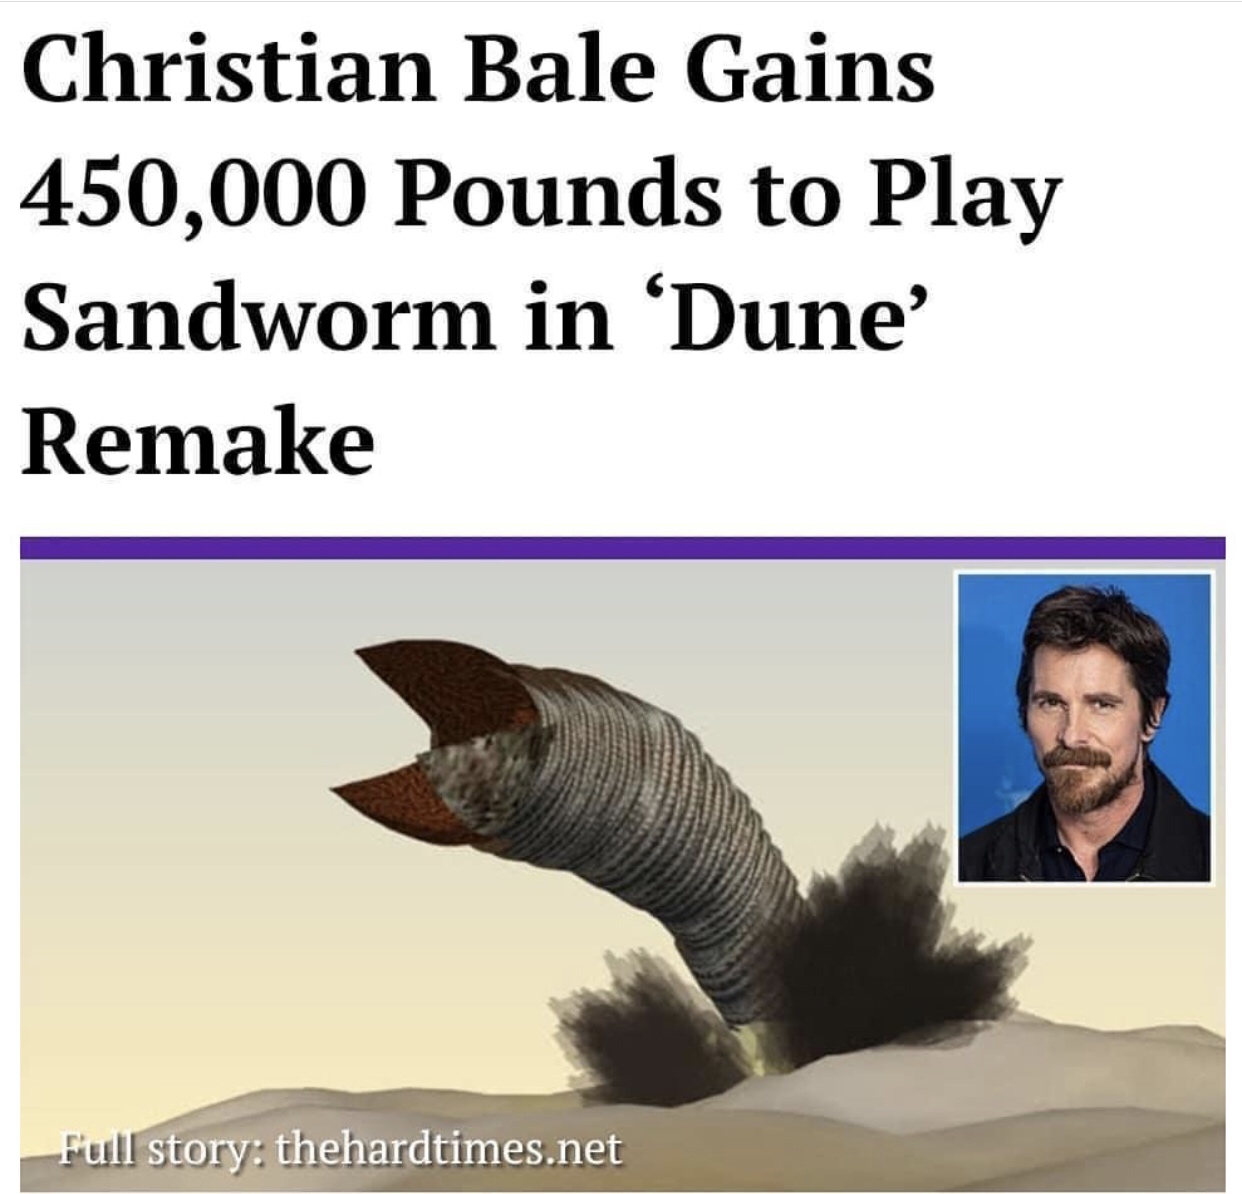 christian bale dune - Christian Bale Gains 450,000 Pounds to Play Sandworm in Dune' Remake Full story thehardtimes.net